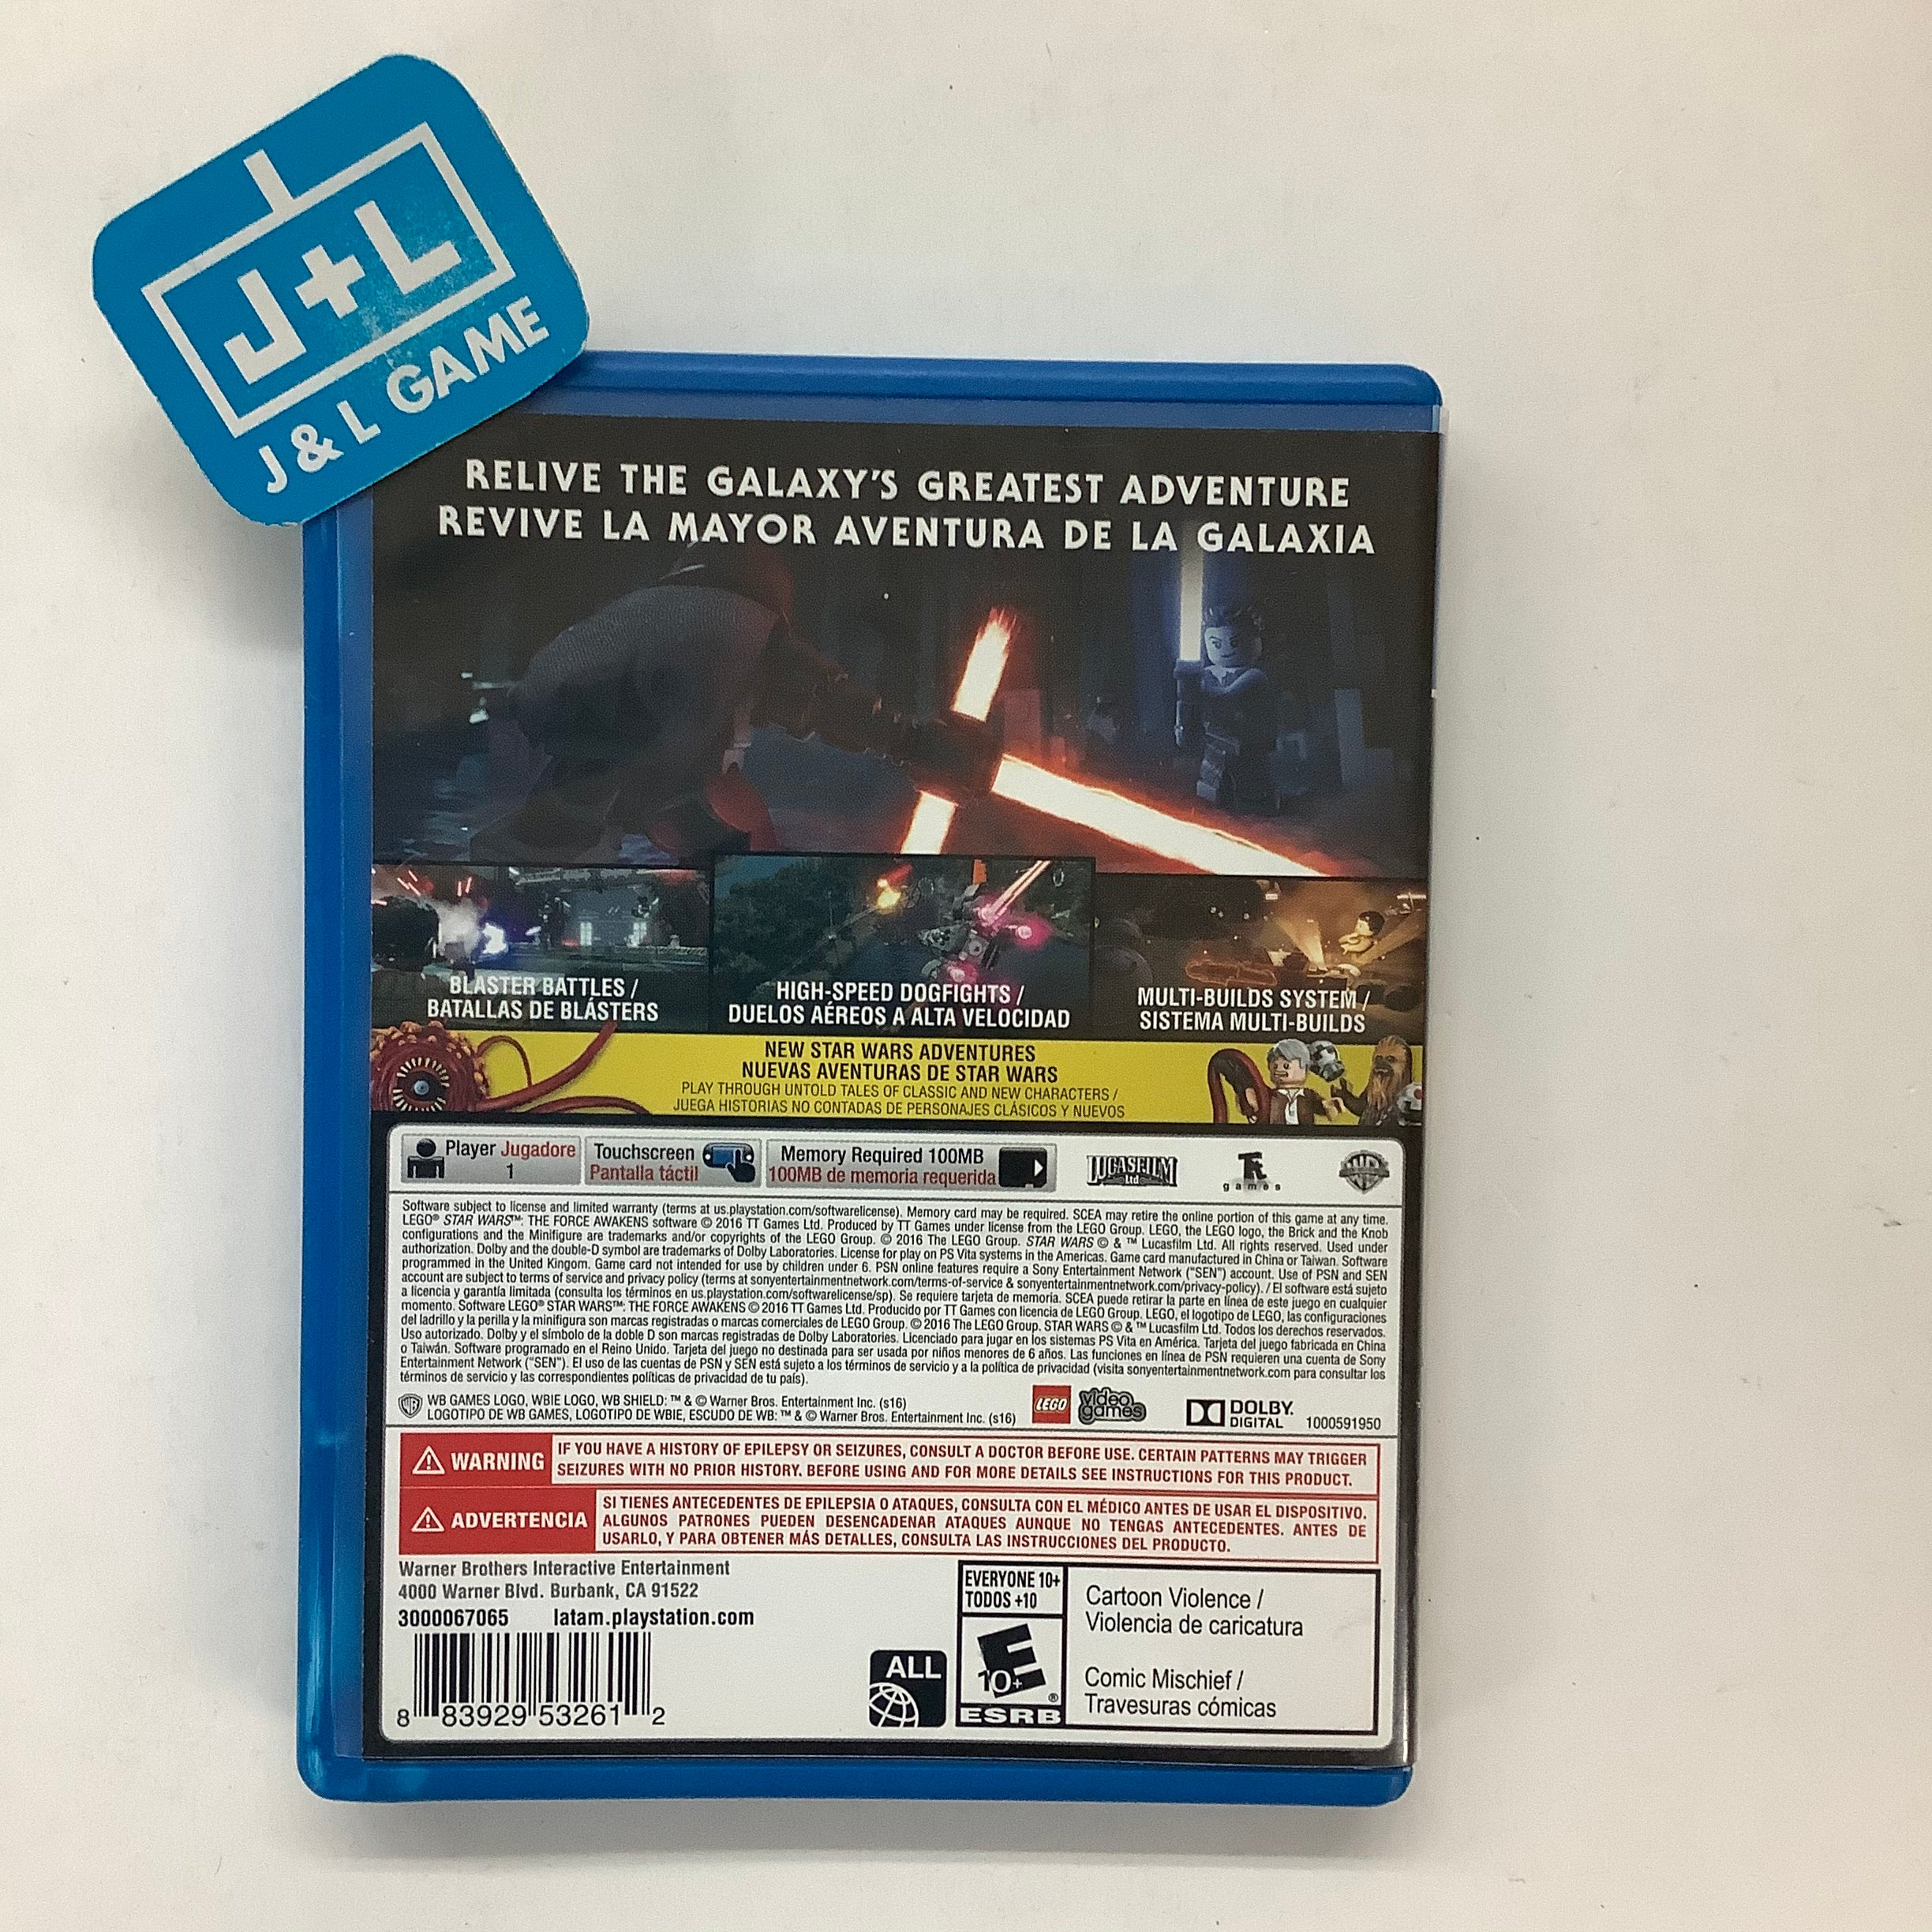 LEGO Star Wars: The Force Awakens -  (PSV) PlayStation Vita [Pre-Owned] Video Games Warner Bros. Interactive Entertainment   